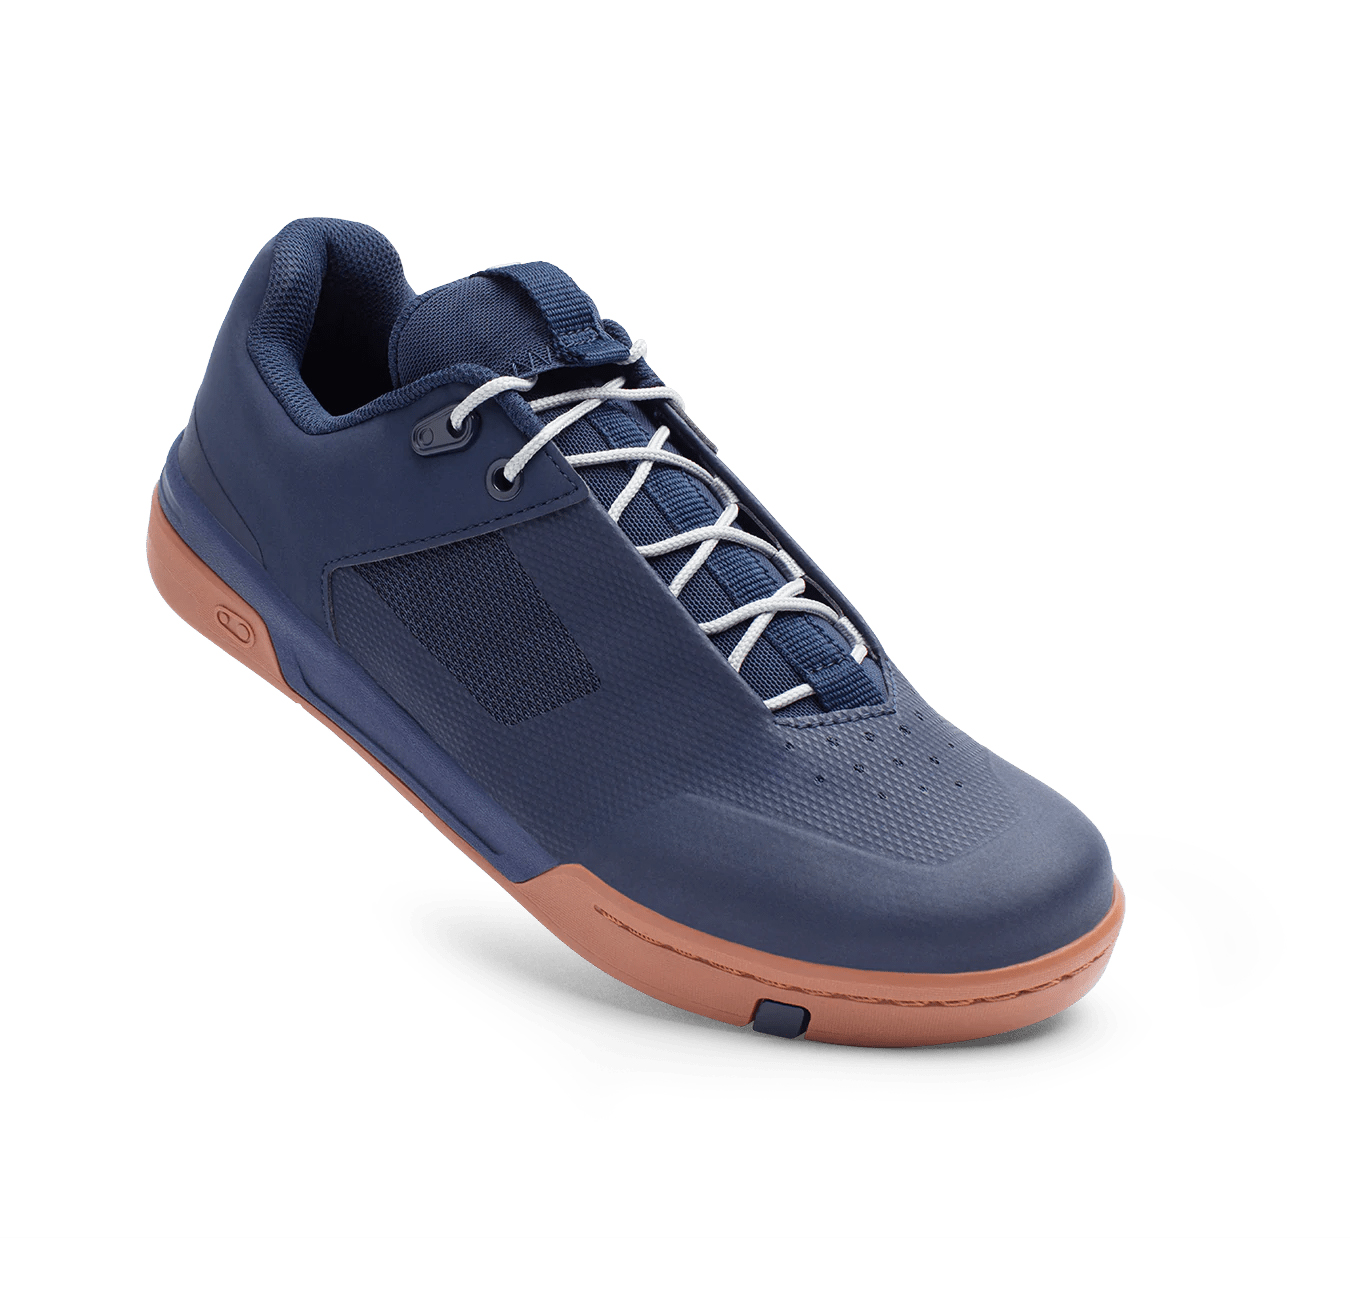 Zapatillas STAMP LACE Navy/Goma Crankbrothers